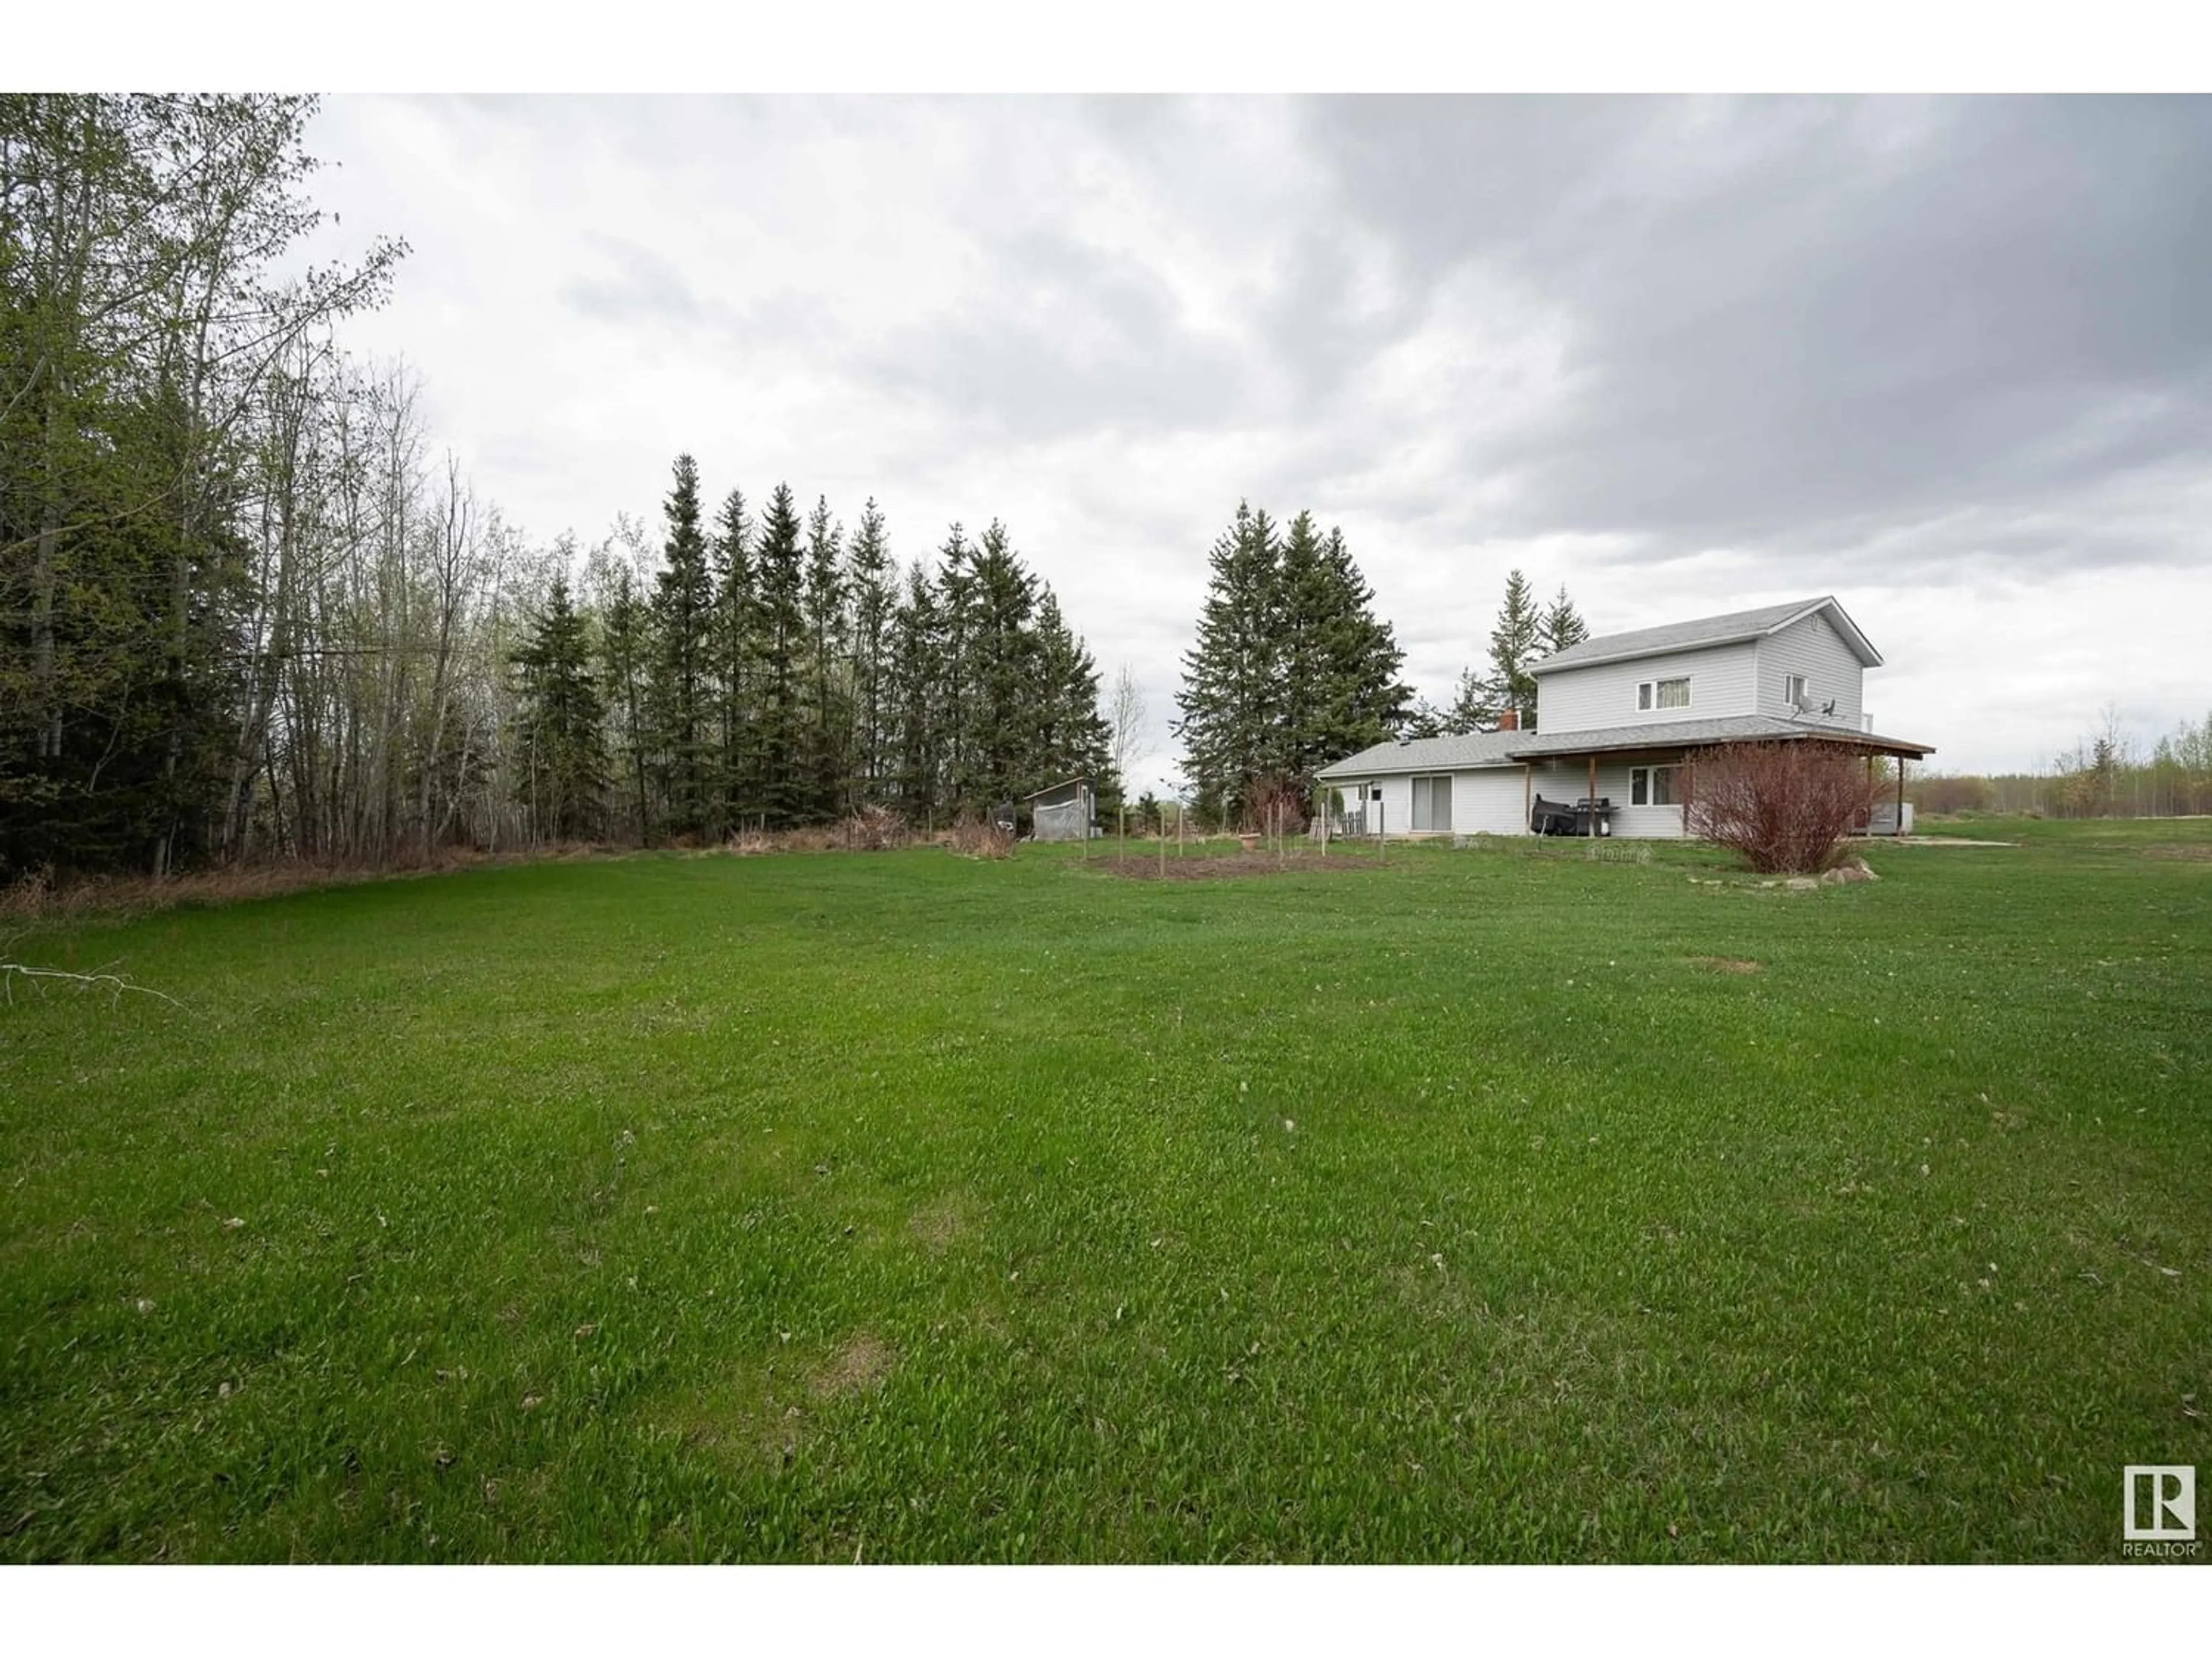 Fenced yard for 642063 Rge Rd 213, Rural Athabasca County Alberta T0A0R0